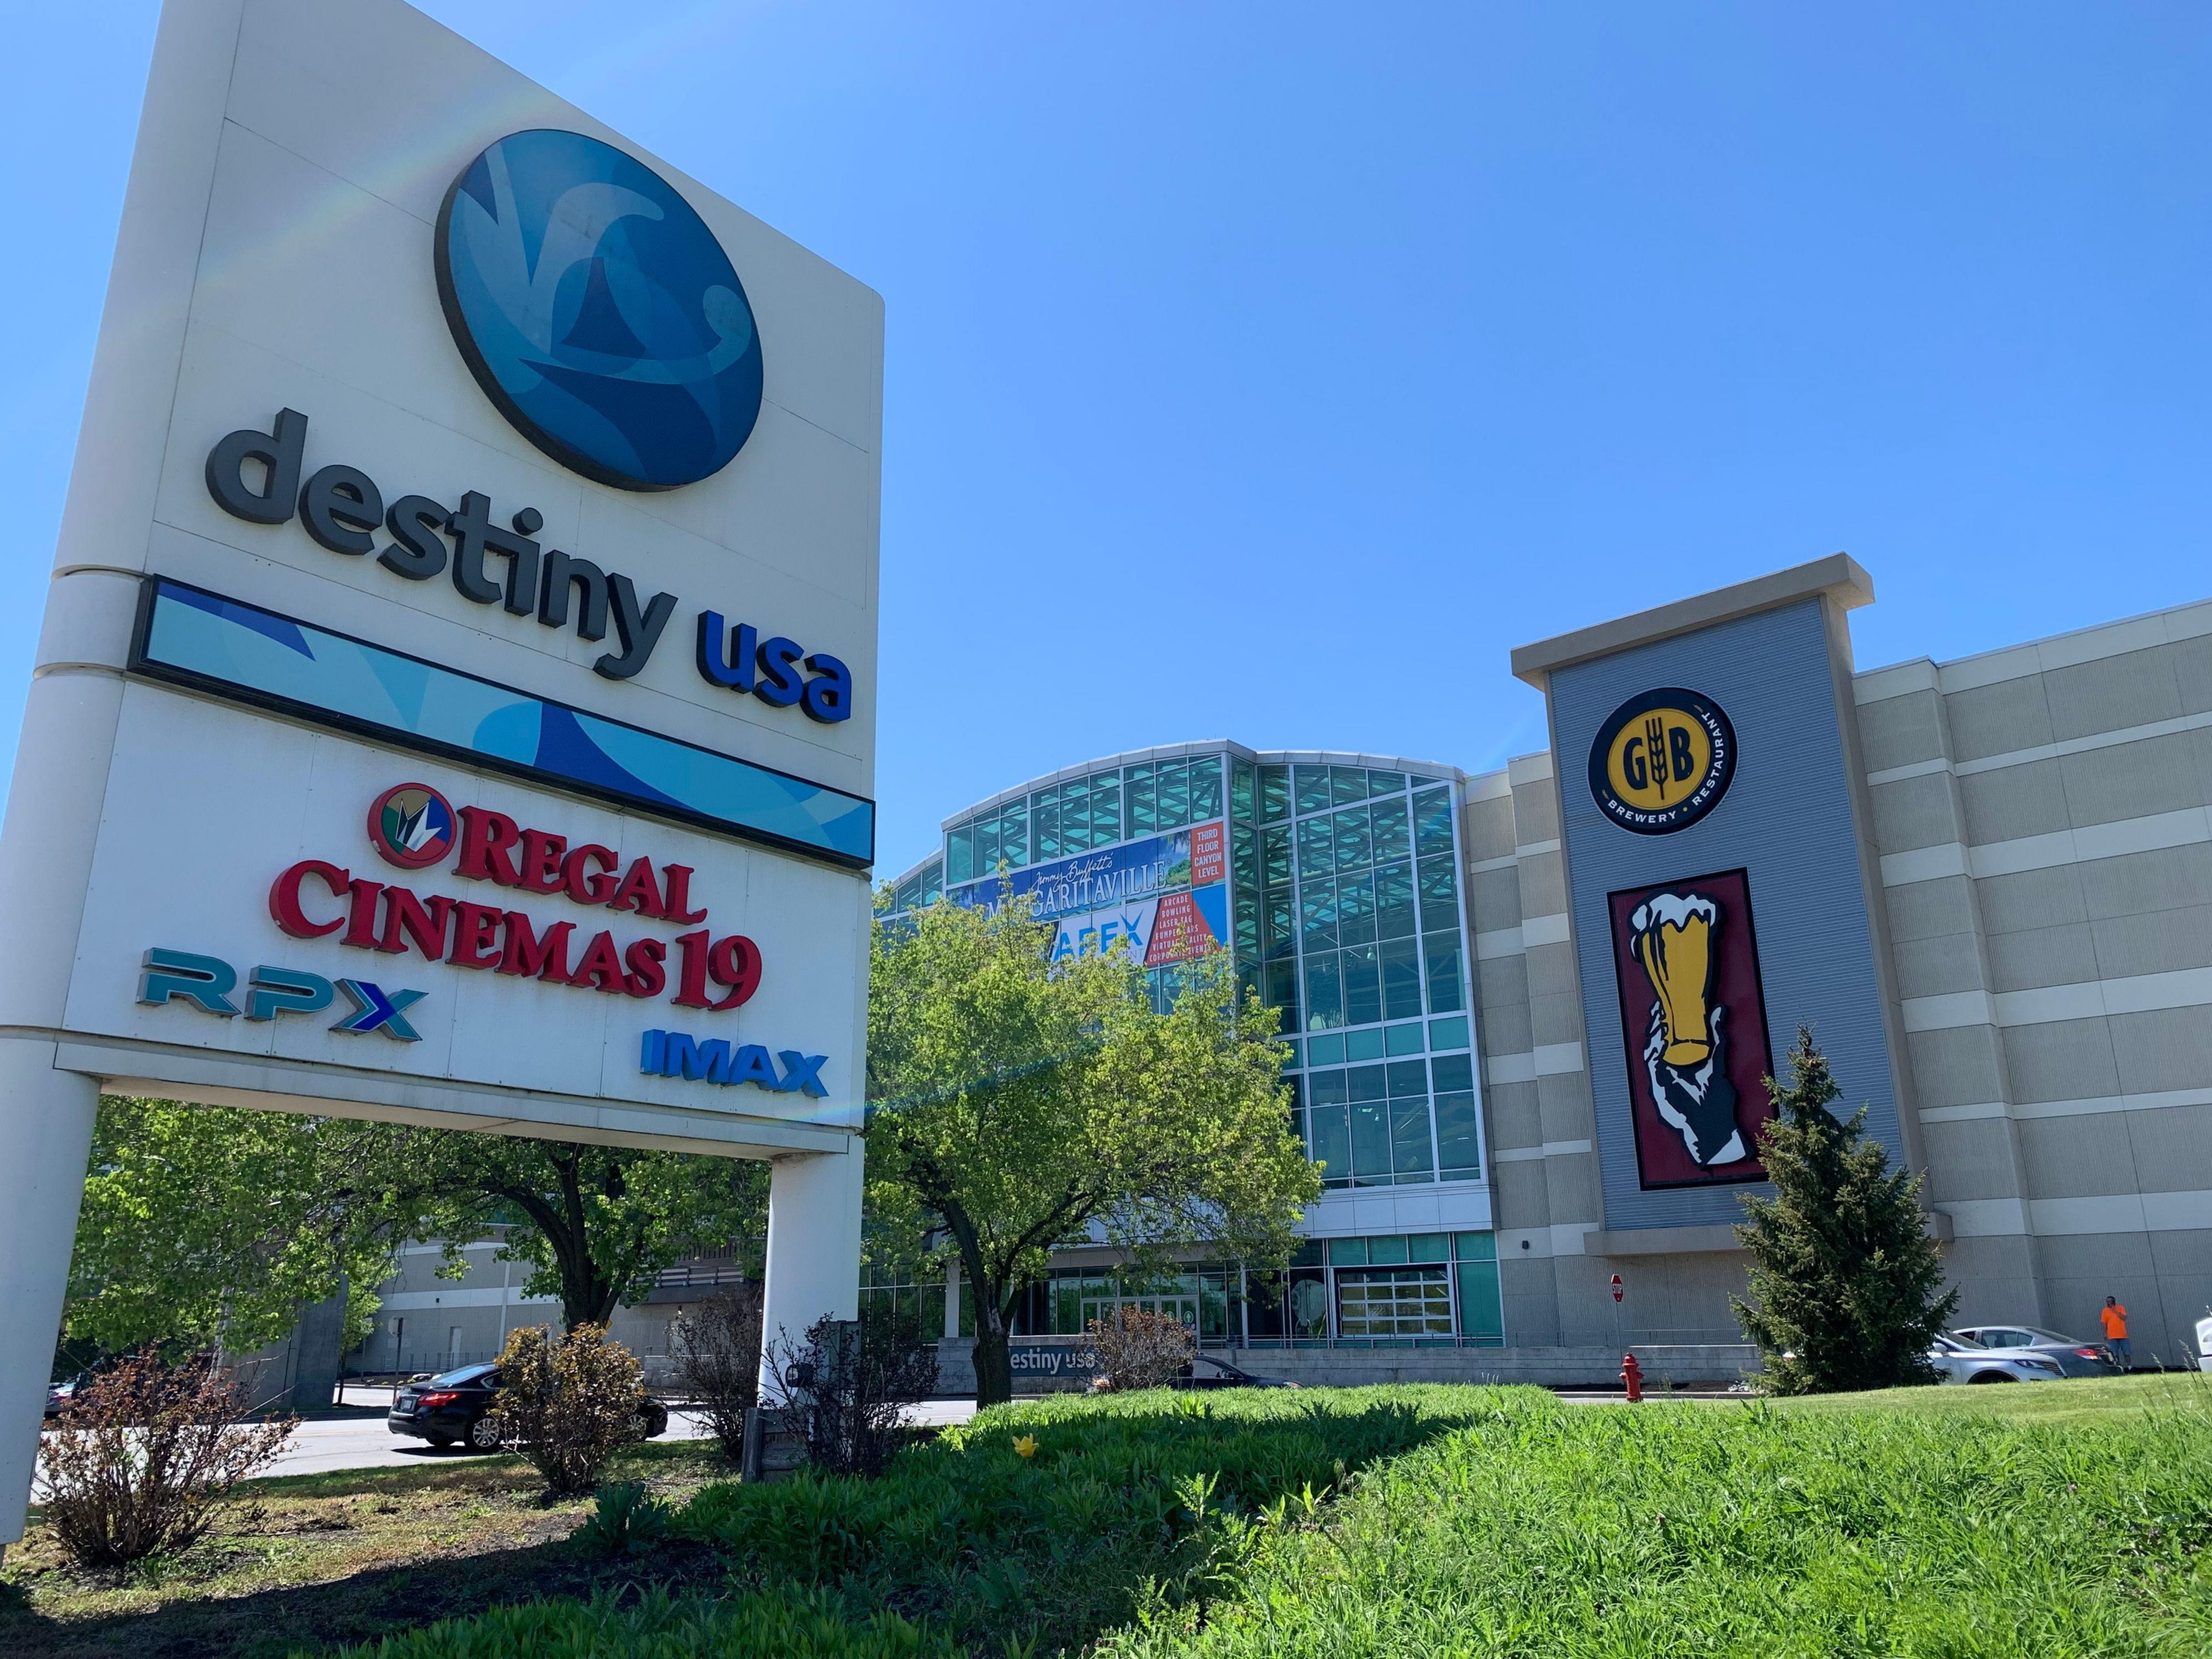 This lively mall located just 2 miles from the hotel is wonderful place to visit with family and friends. Destiny USA offers a wide variety of shopping options and eateries, as well as several entertainment options. Complimentary shuttle service to Destiny USA is available. 